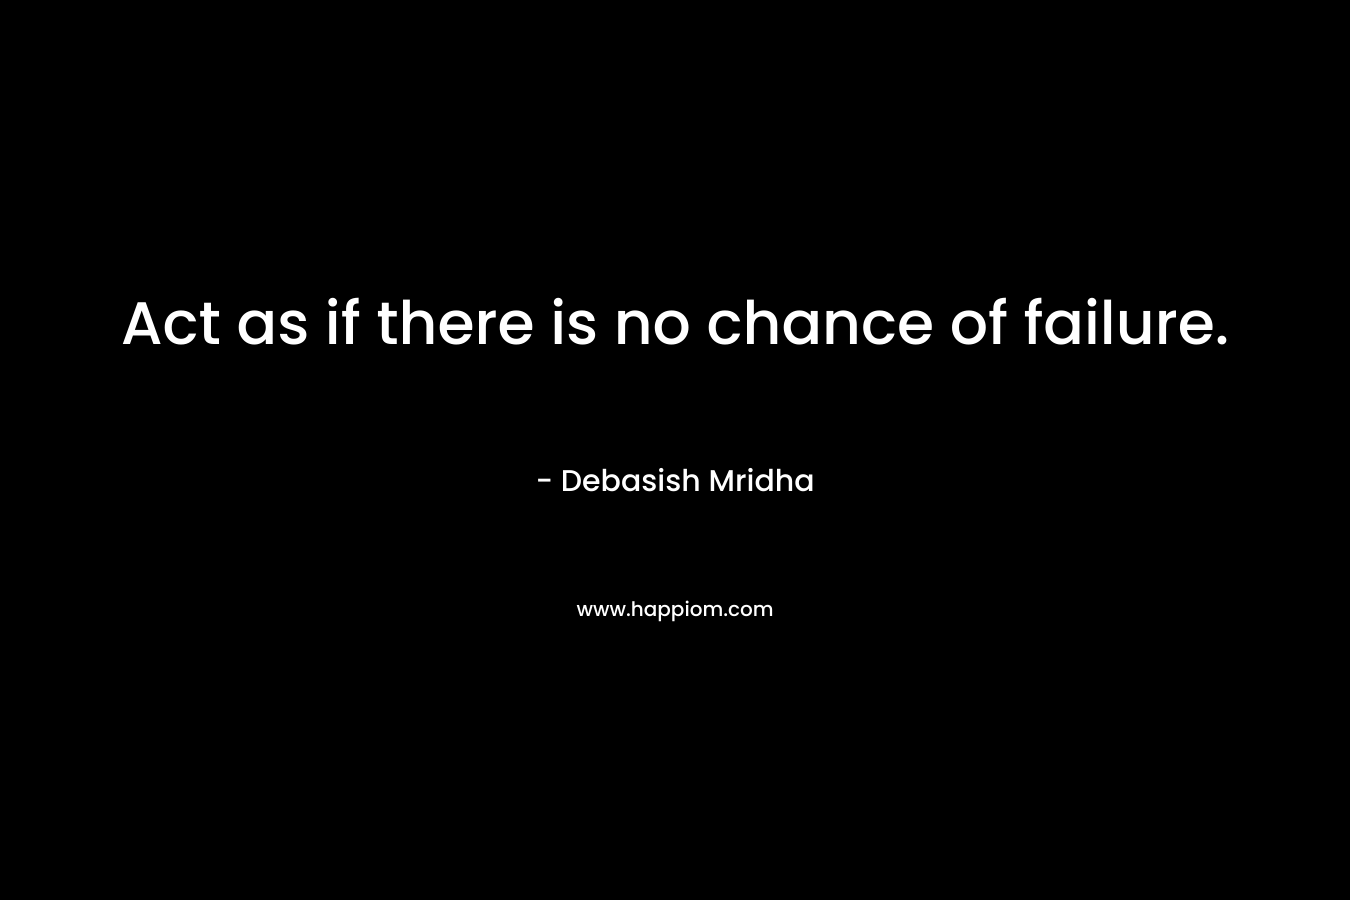 Act as if there is no chance of failure.